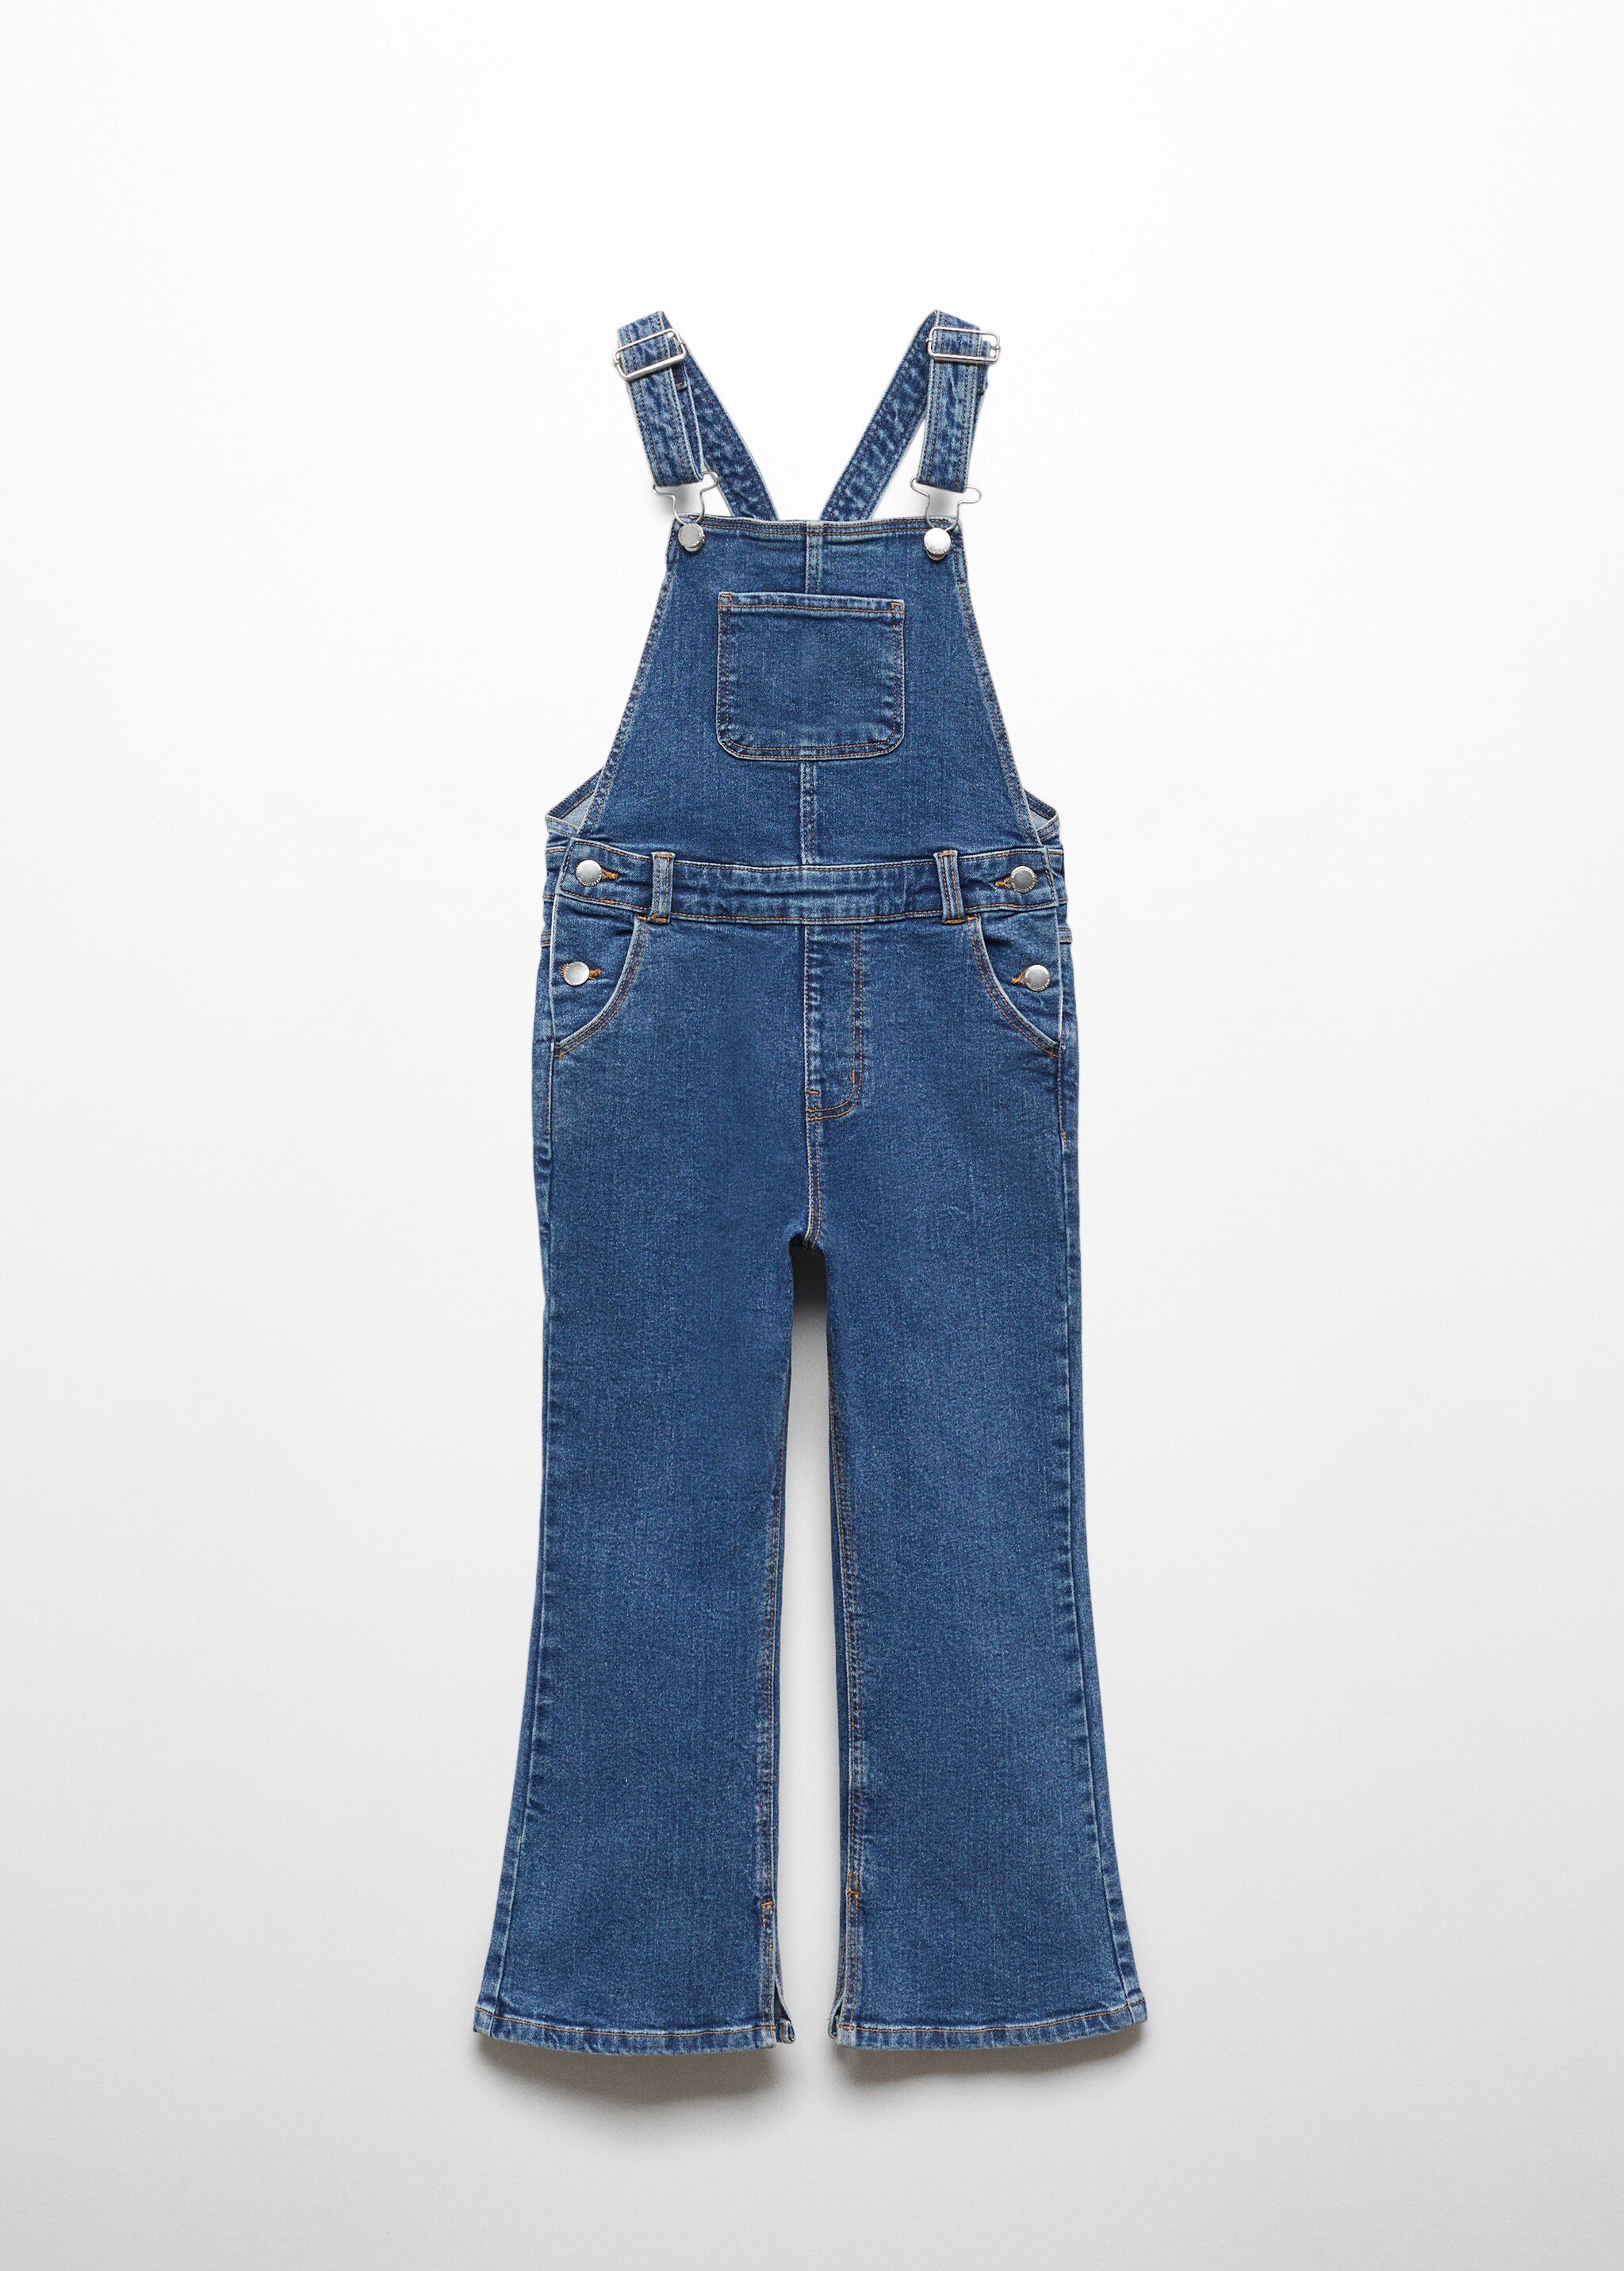 Long denim dungarees - Article without model